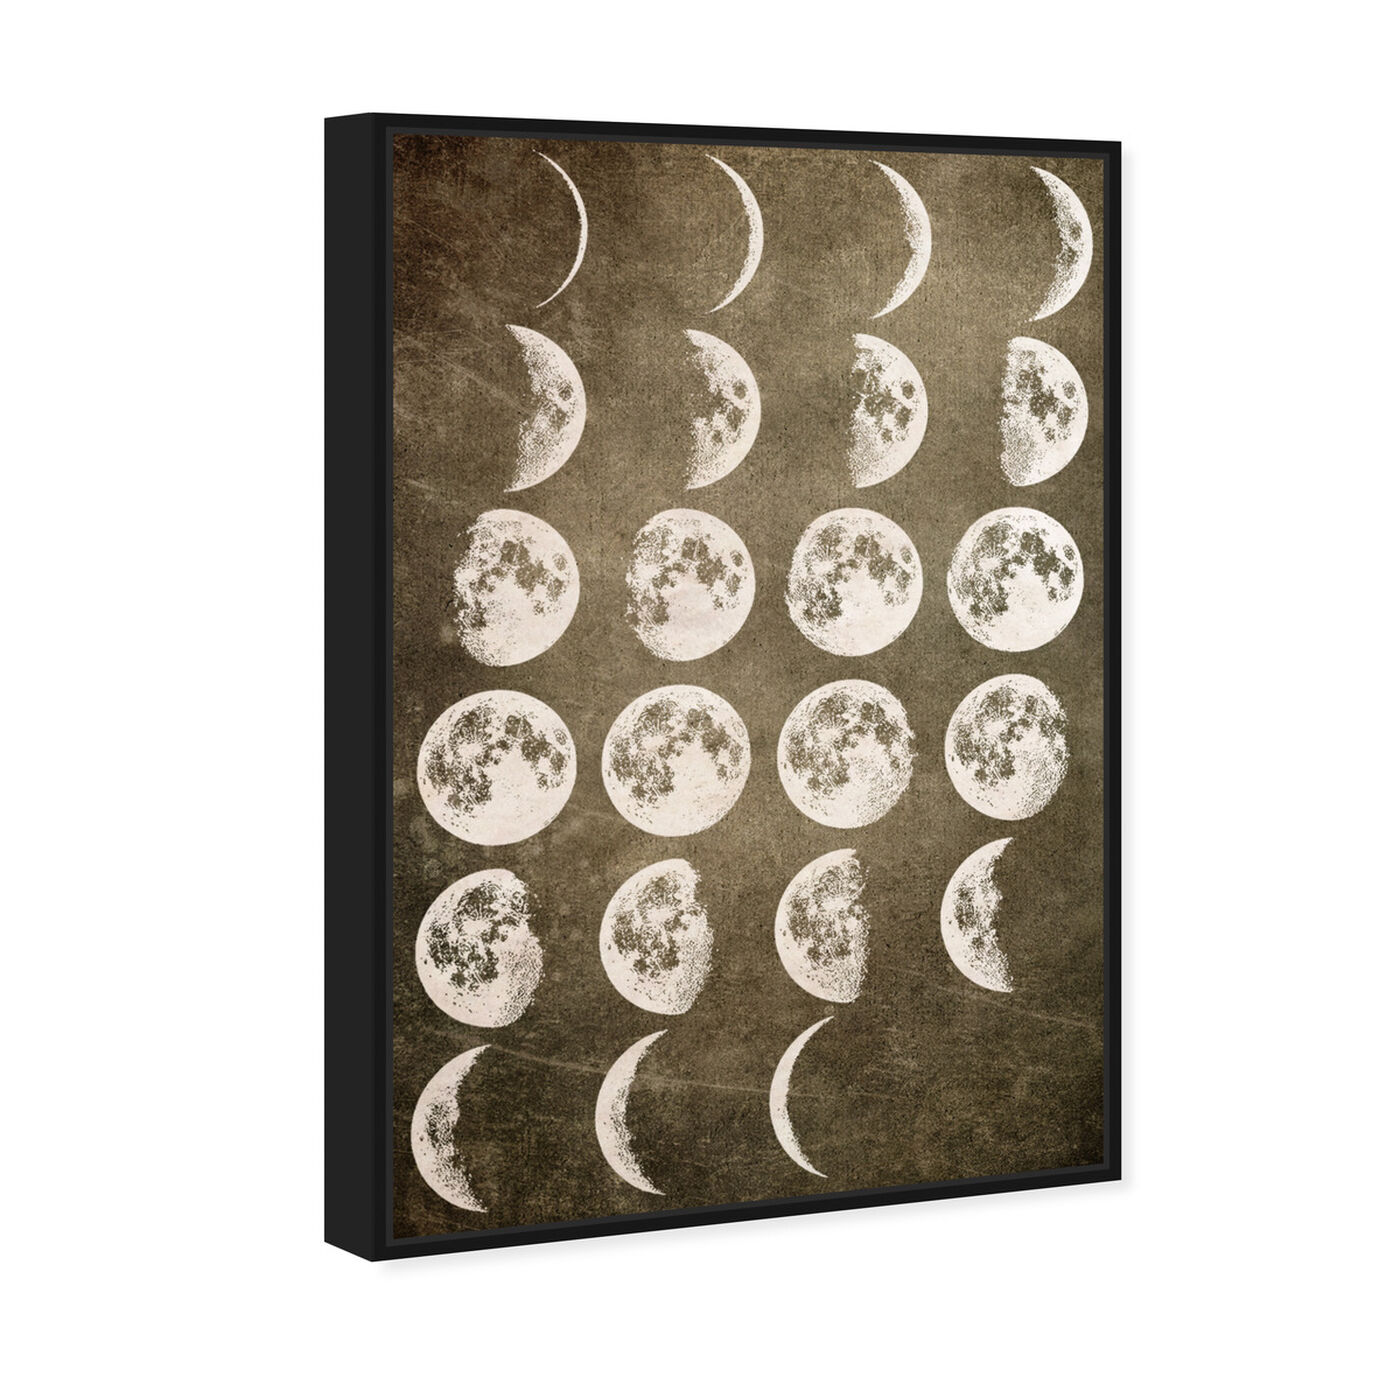 Angled view of Lunar Phases featuring astronomy and space and moons phases art.